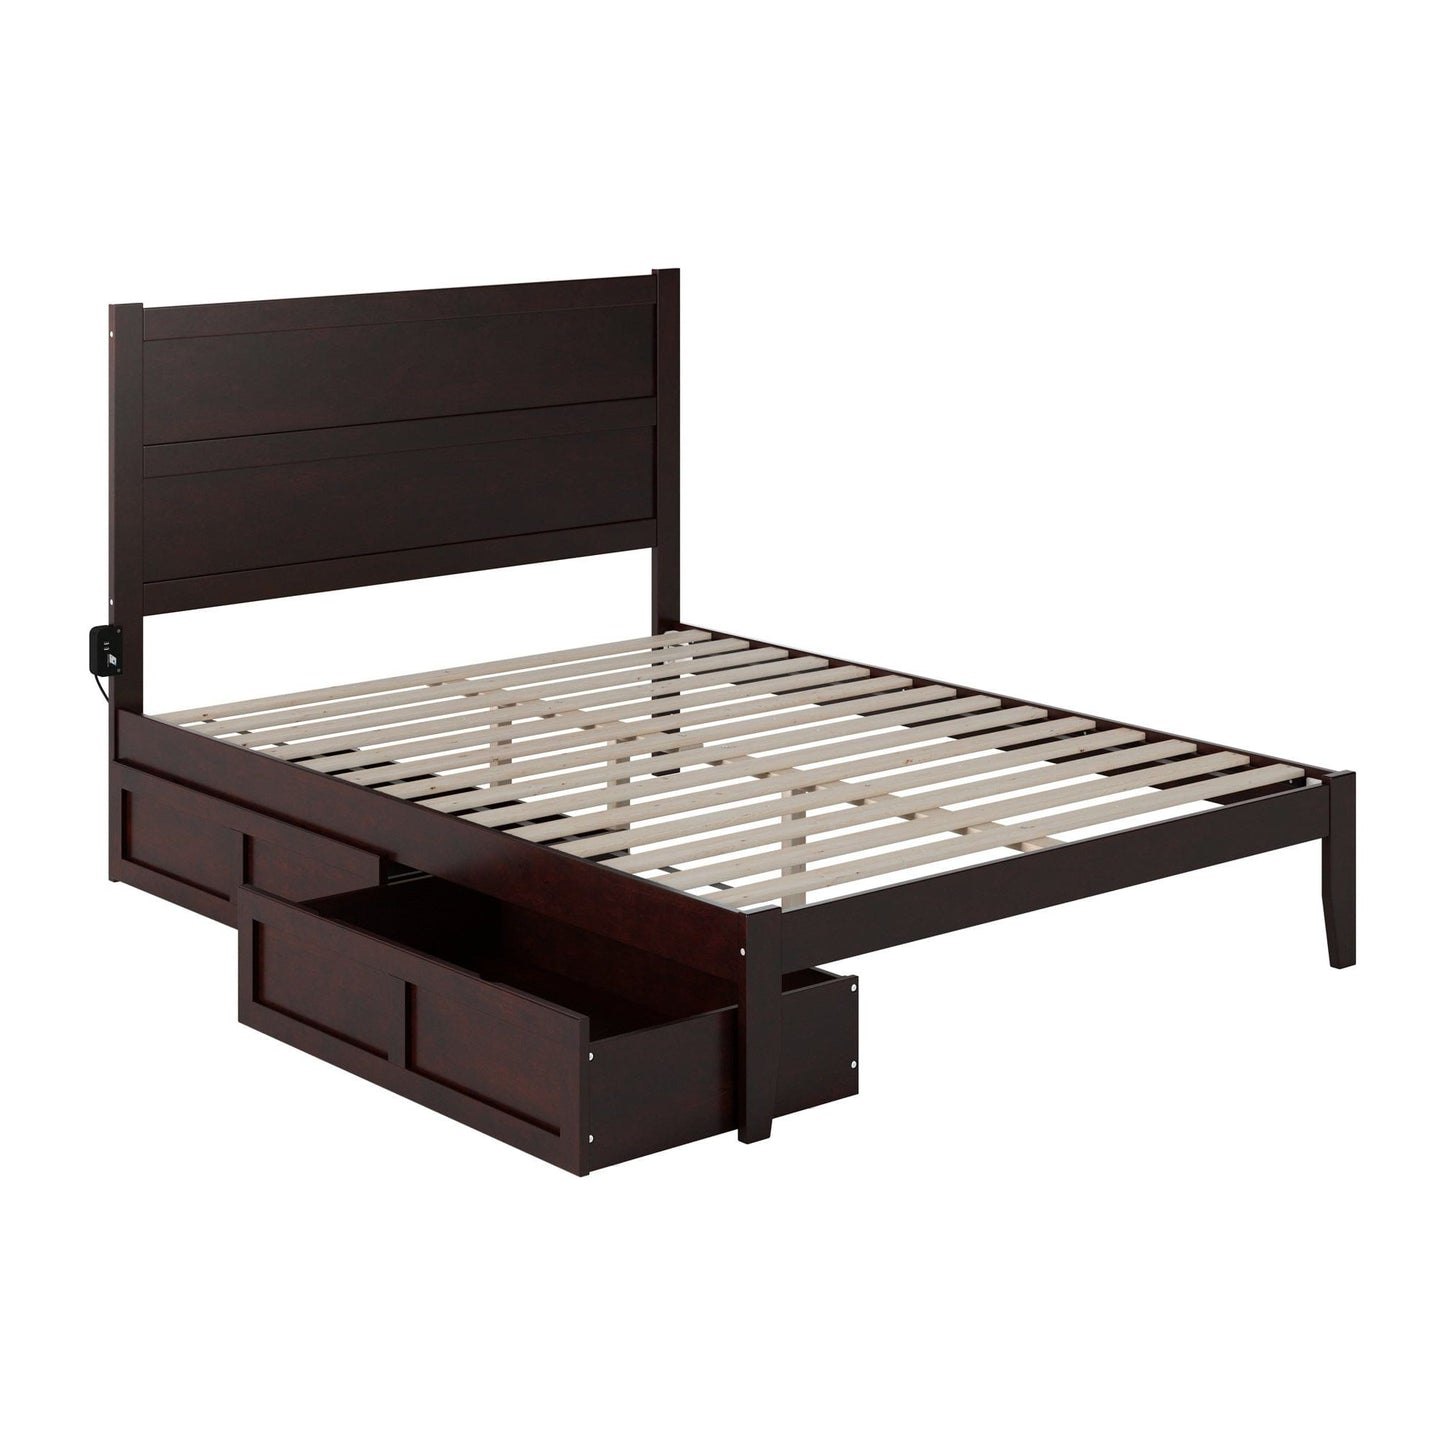 AFI Furnishings NoHo Queen Bed with 2 Drawers in Espresso